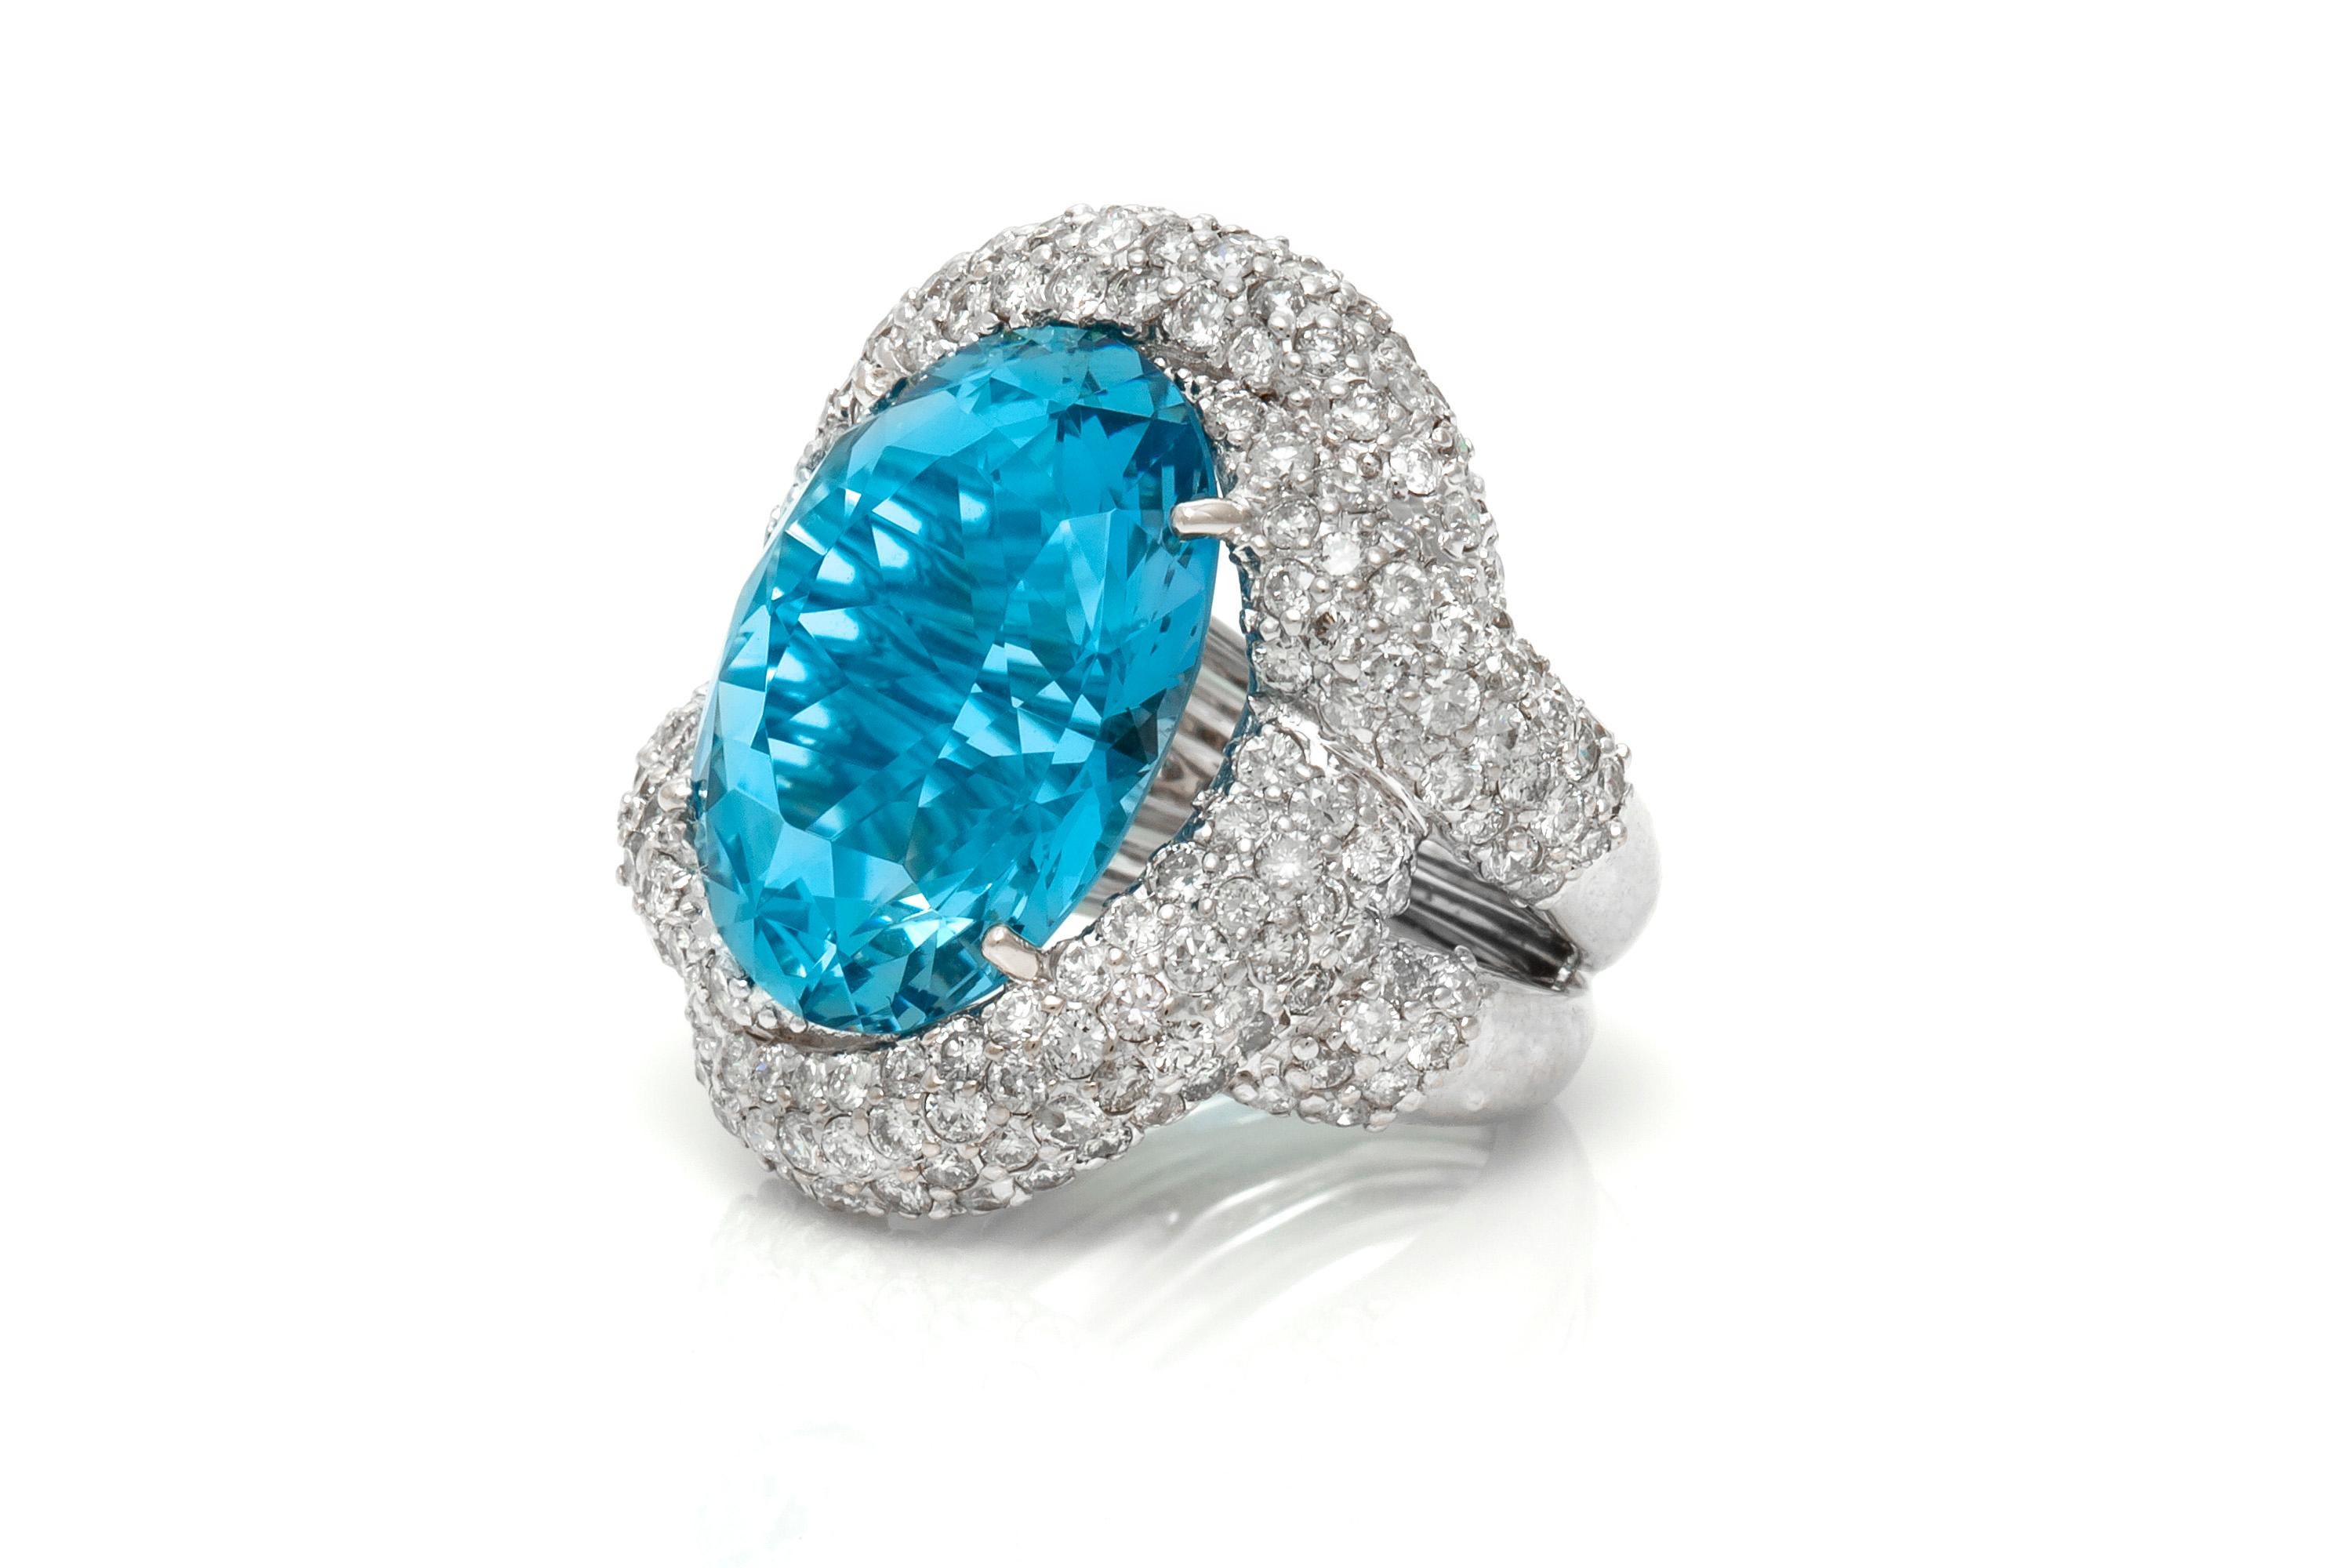 Cocktail ring, finely crafted in platinum with oval aquamarine center stone weighing a total of 17.40 carats and diamonds around weighing approximately a total of 4.50 carats.